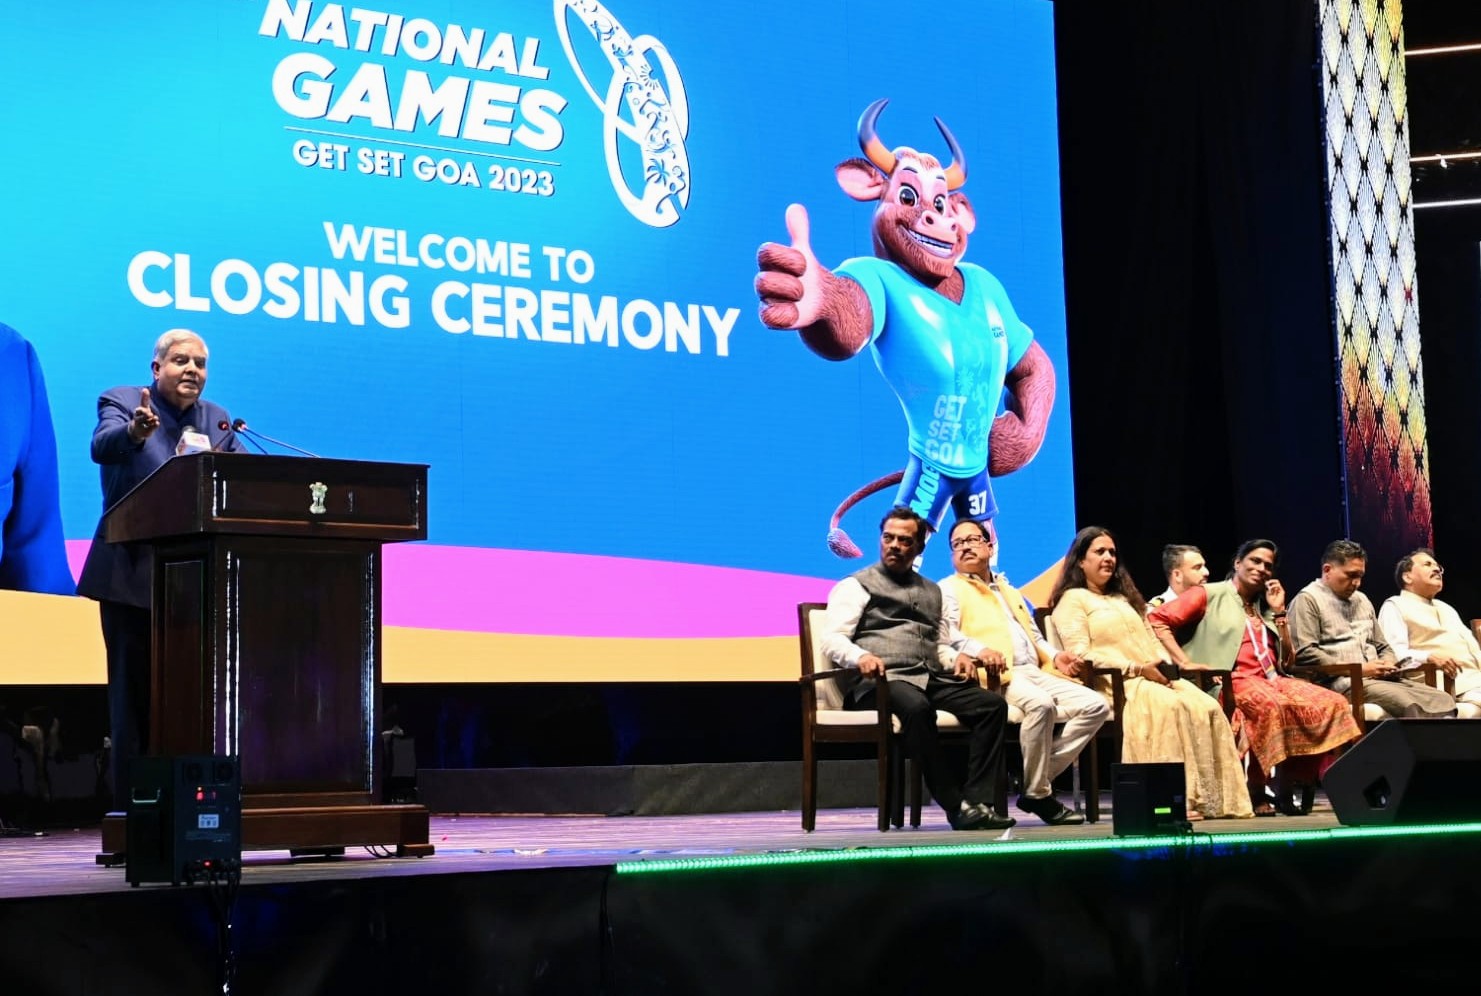 The Vice-President, Shri Jagdeep Dhankhar addressing the gathering at the closing ceremony of the 37th National Games in Goa on November 9, 2023.